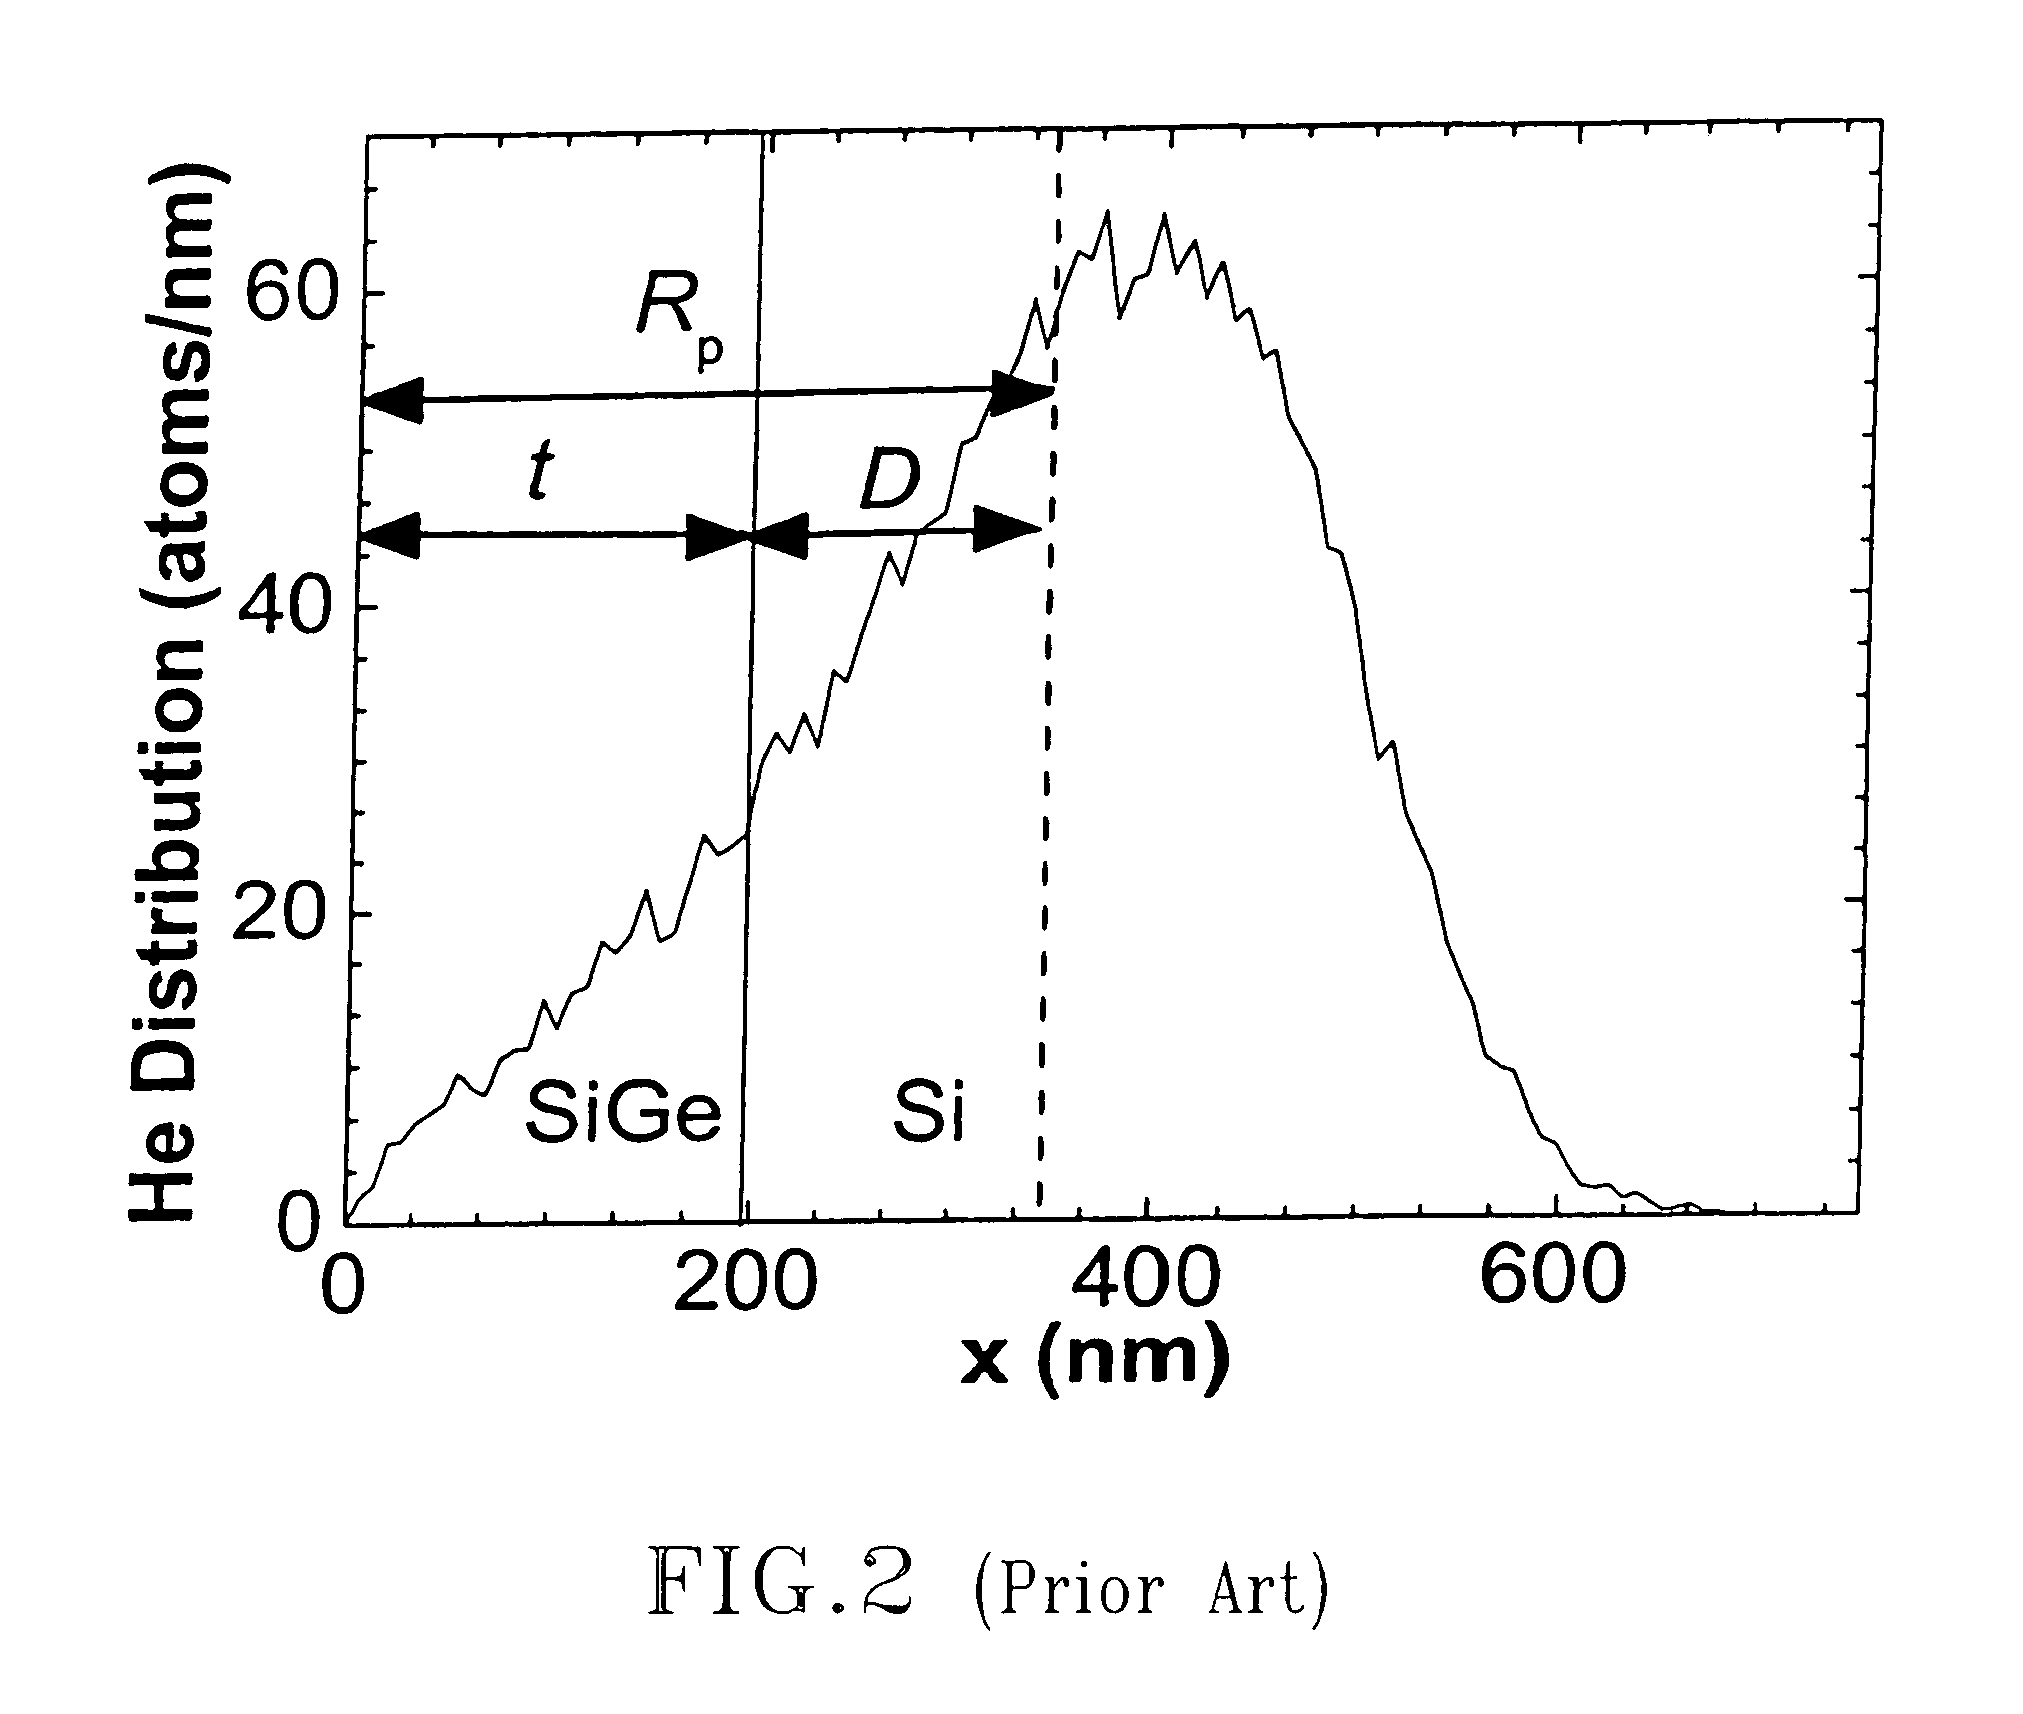 Hetero-integrated strained silicon n- and p-MOSFETs